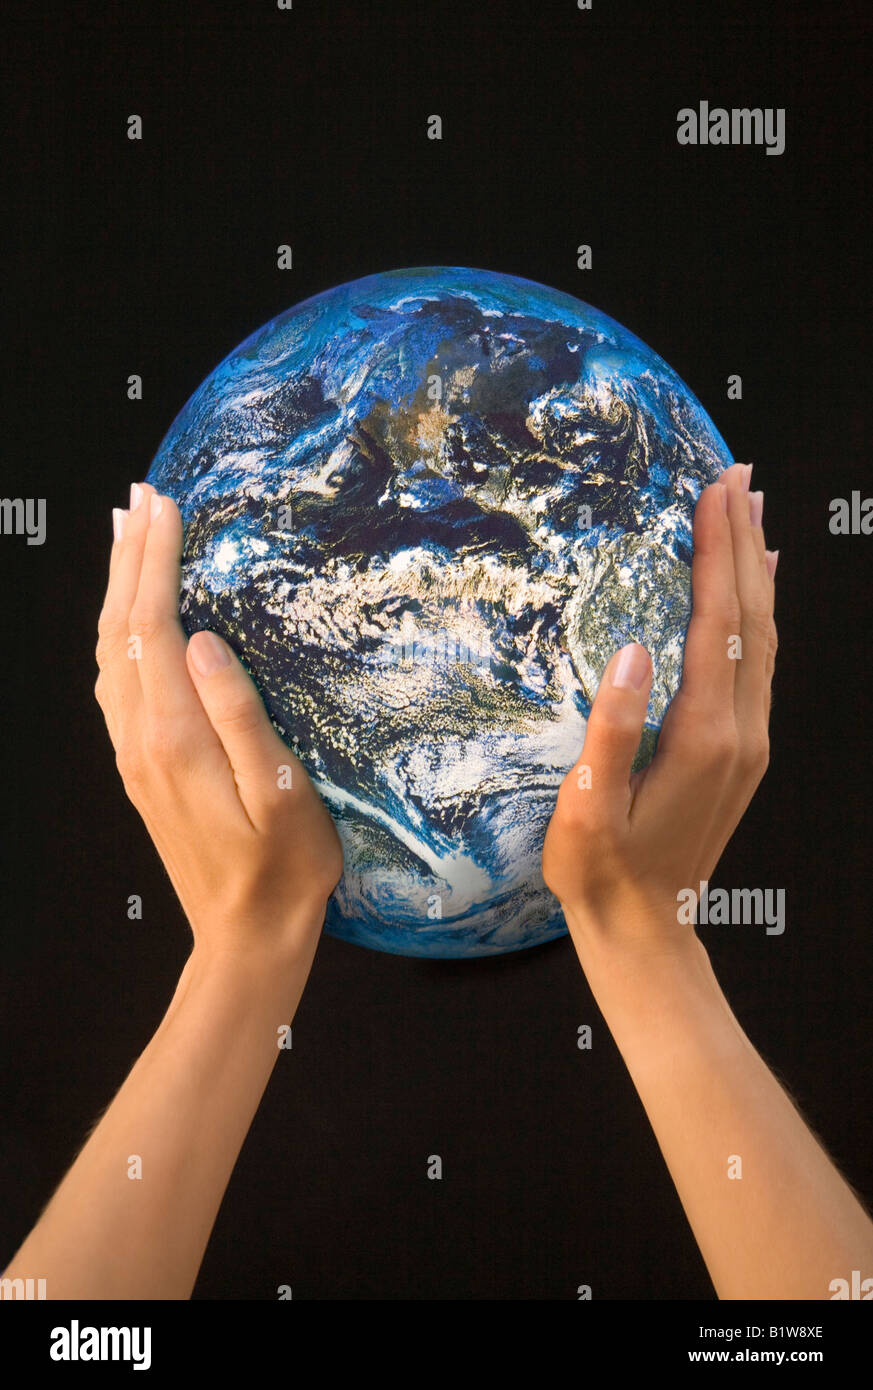 Hands against a black background, holding the earth in a gesture of protection. Stock Photo